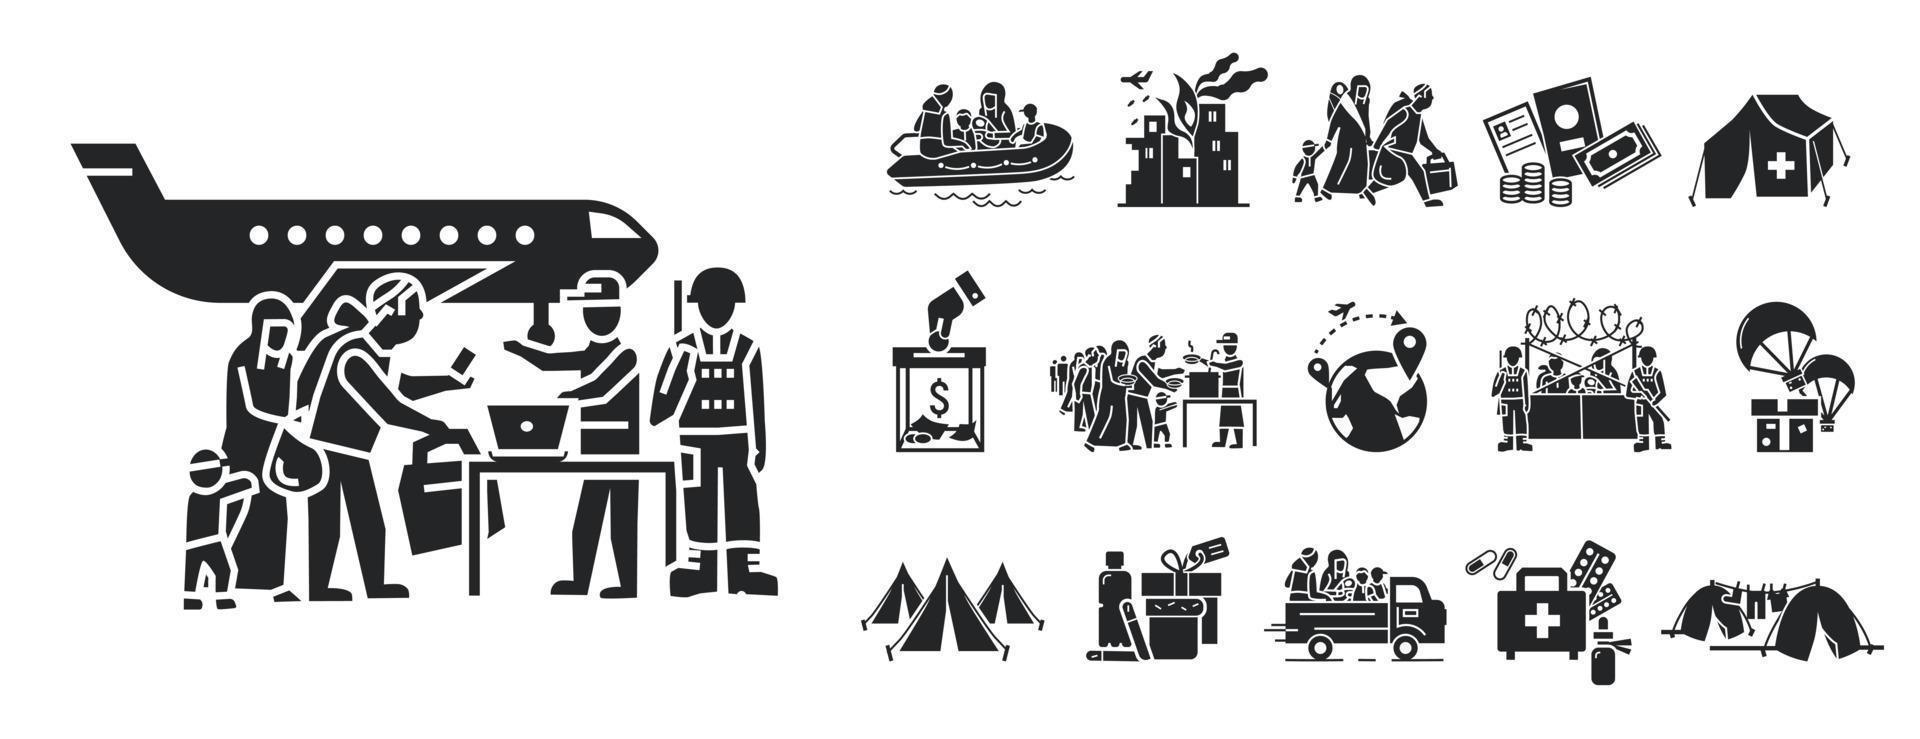 Migrant icon set, simple style vector